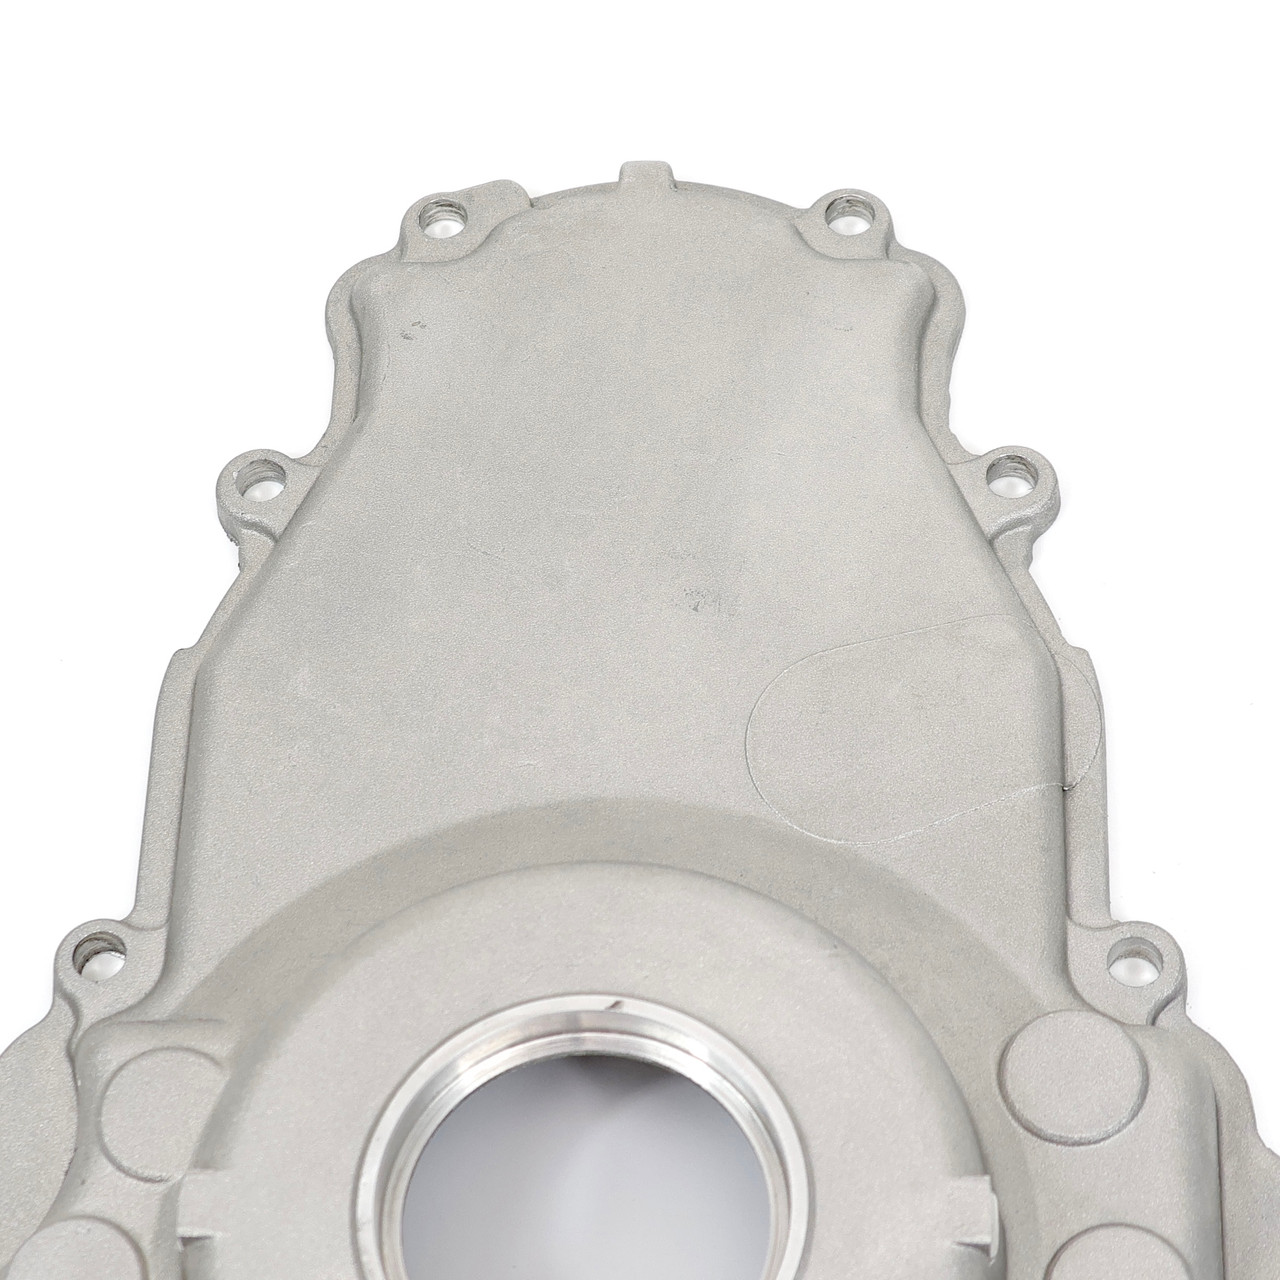 Gen 3 LS Timing Cover LS1 LS6 LQ4 LQ9 LR4 LM7 L59 LM4 L33 Front Cover for 24x Engines